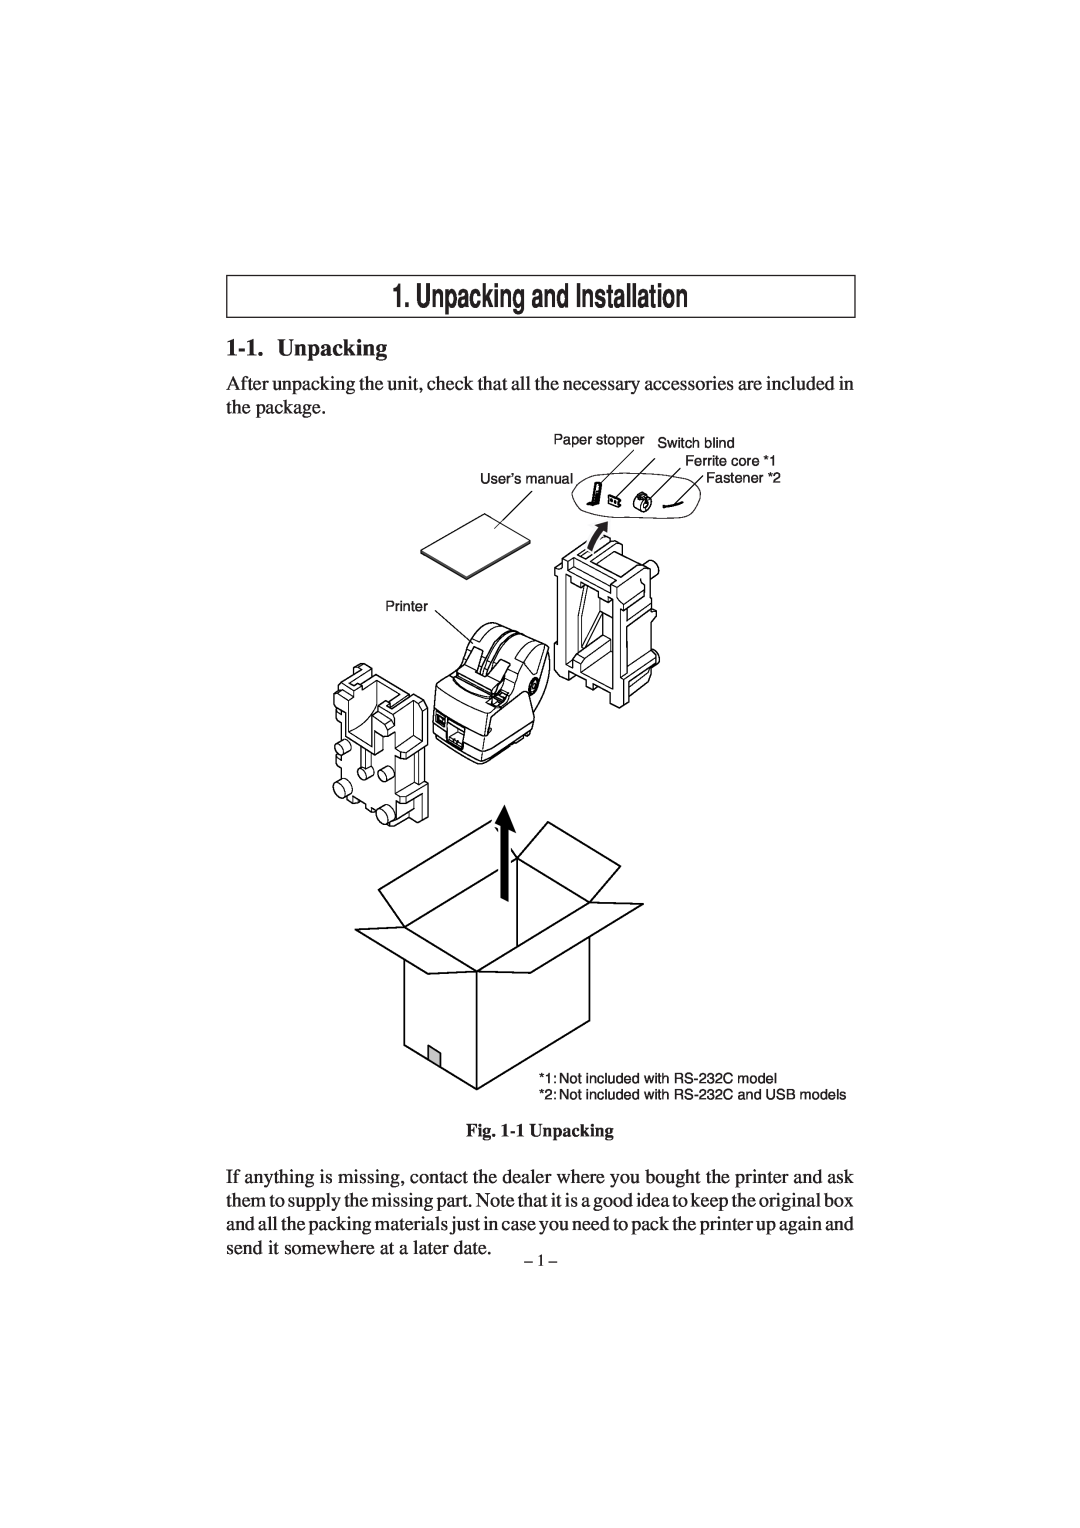 Star Micronics TSP1000 user manual Unpacking and Installation 